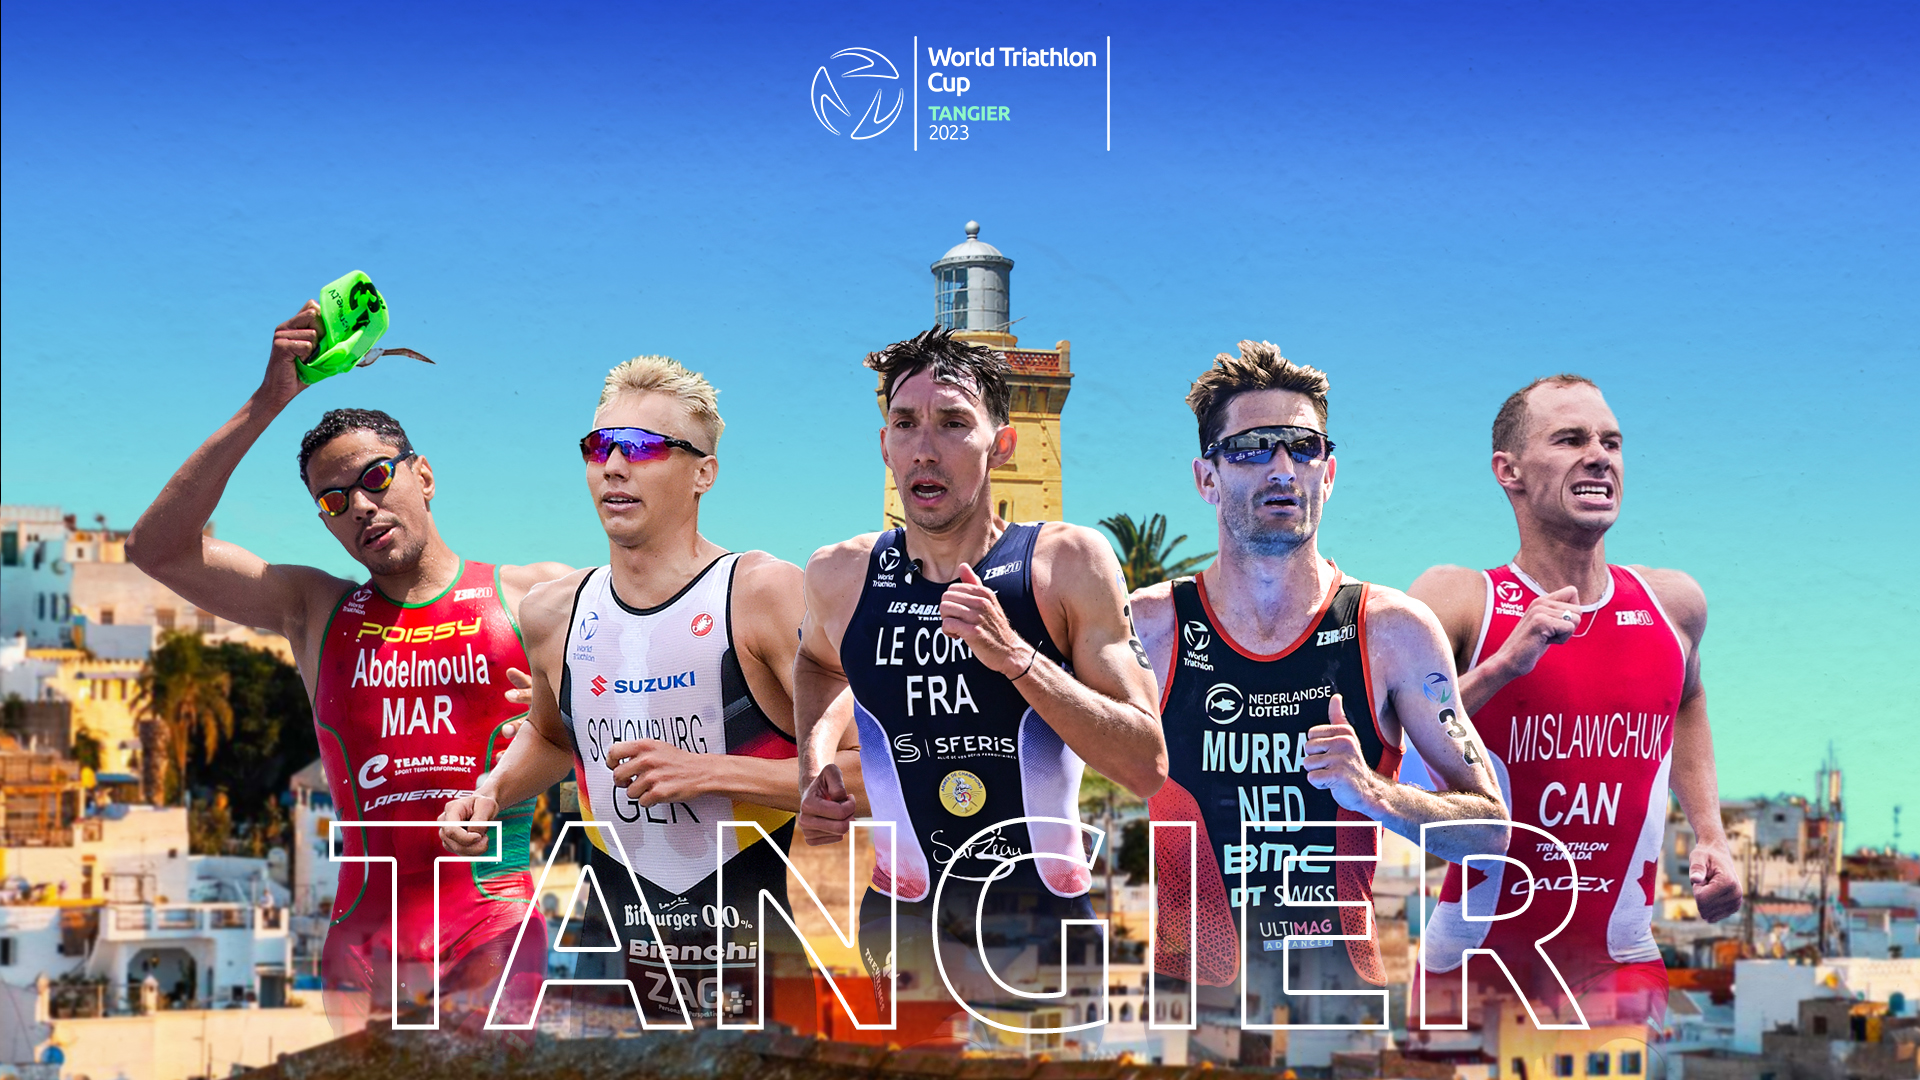 Olympic points chase continues in Tangier • World Triathlon